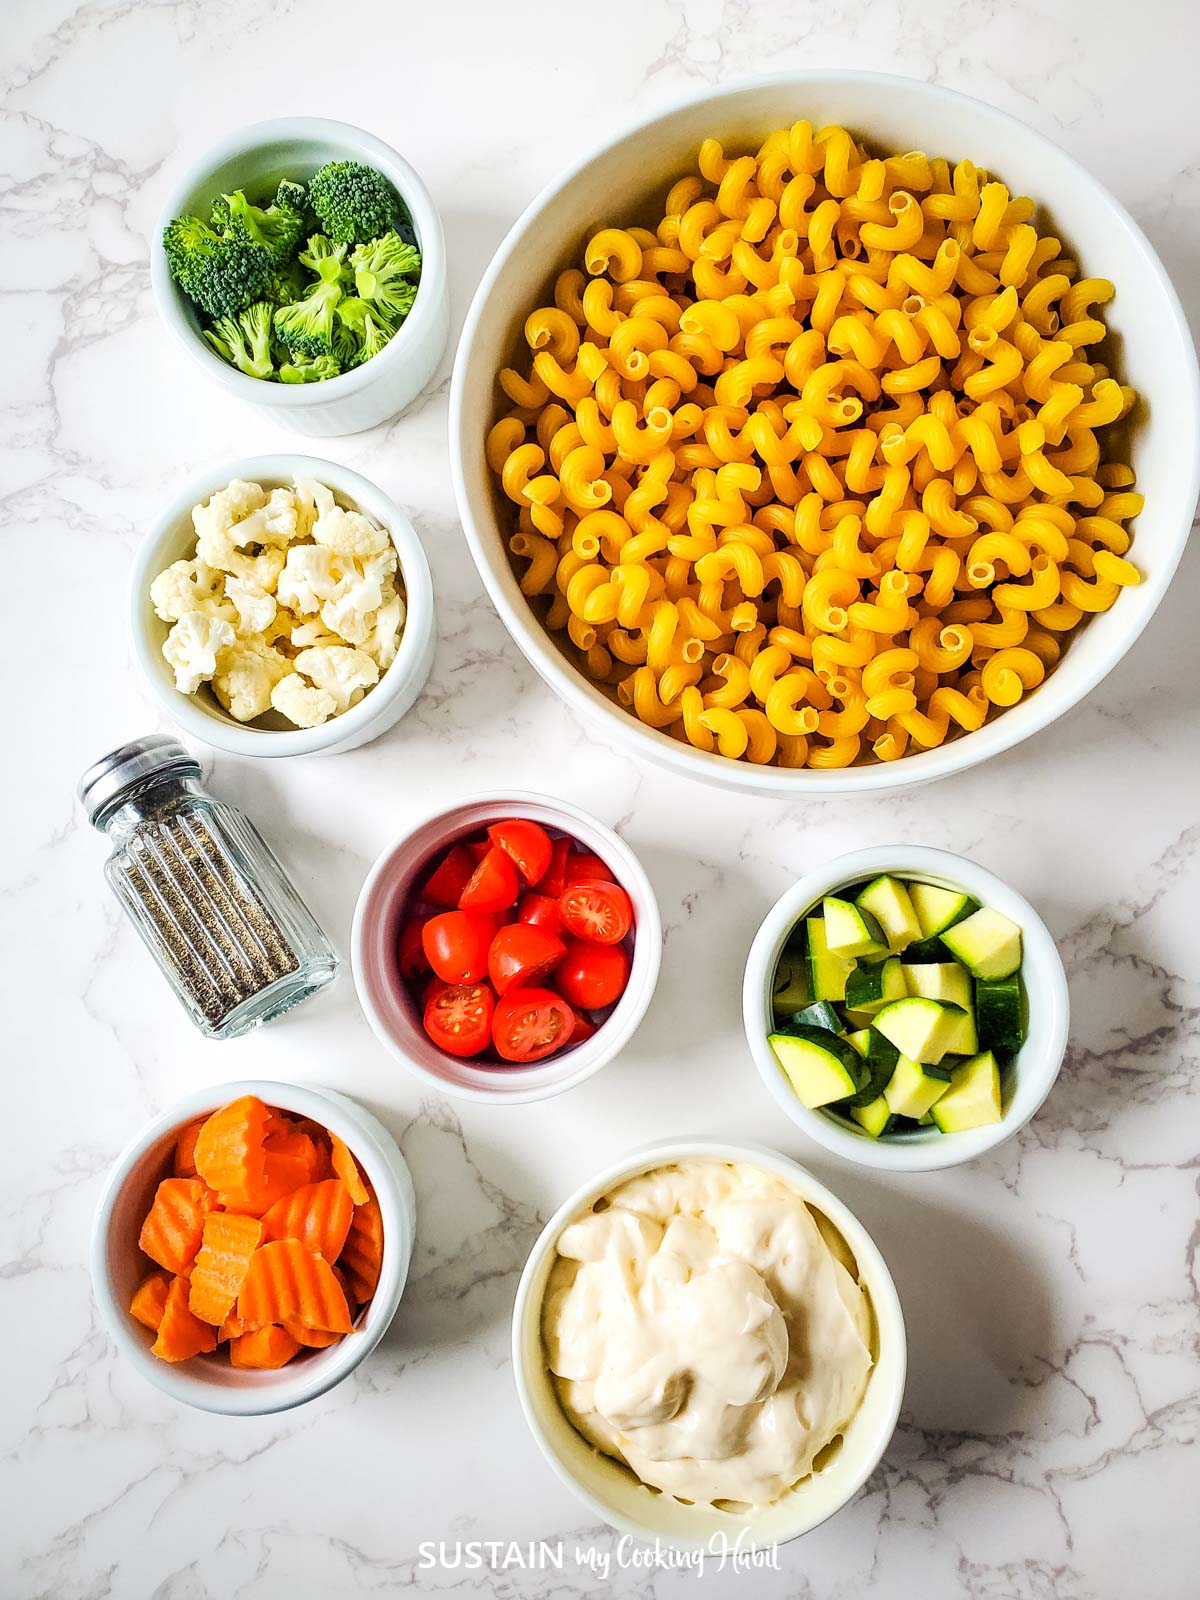 Ingredients needed to make pasta salad including pasta, vegetables, pepper and miracle whip.